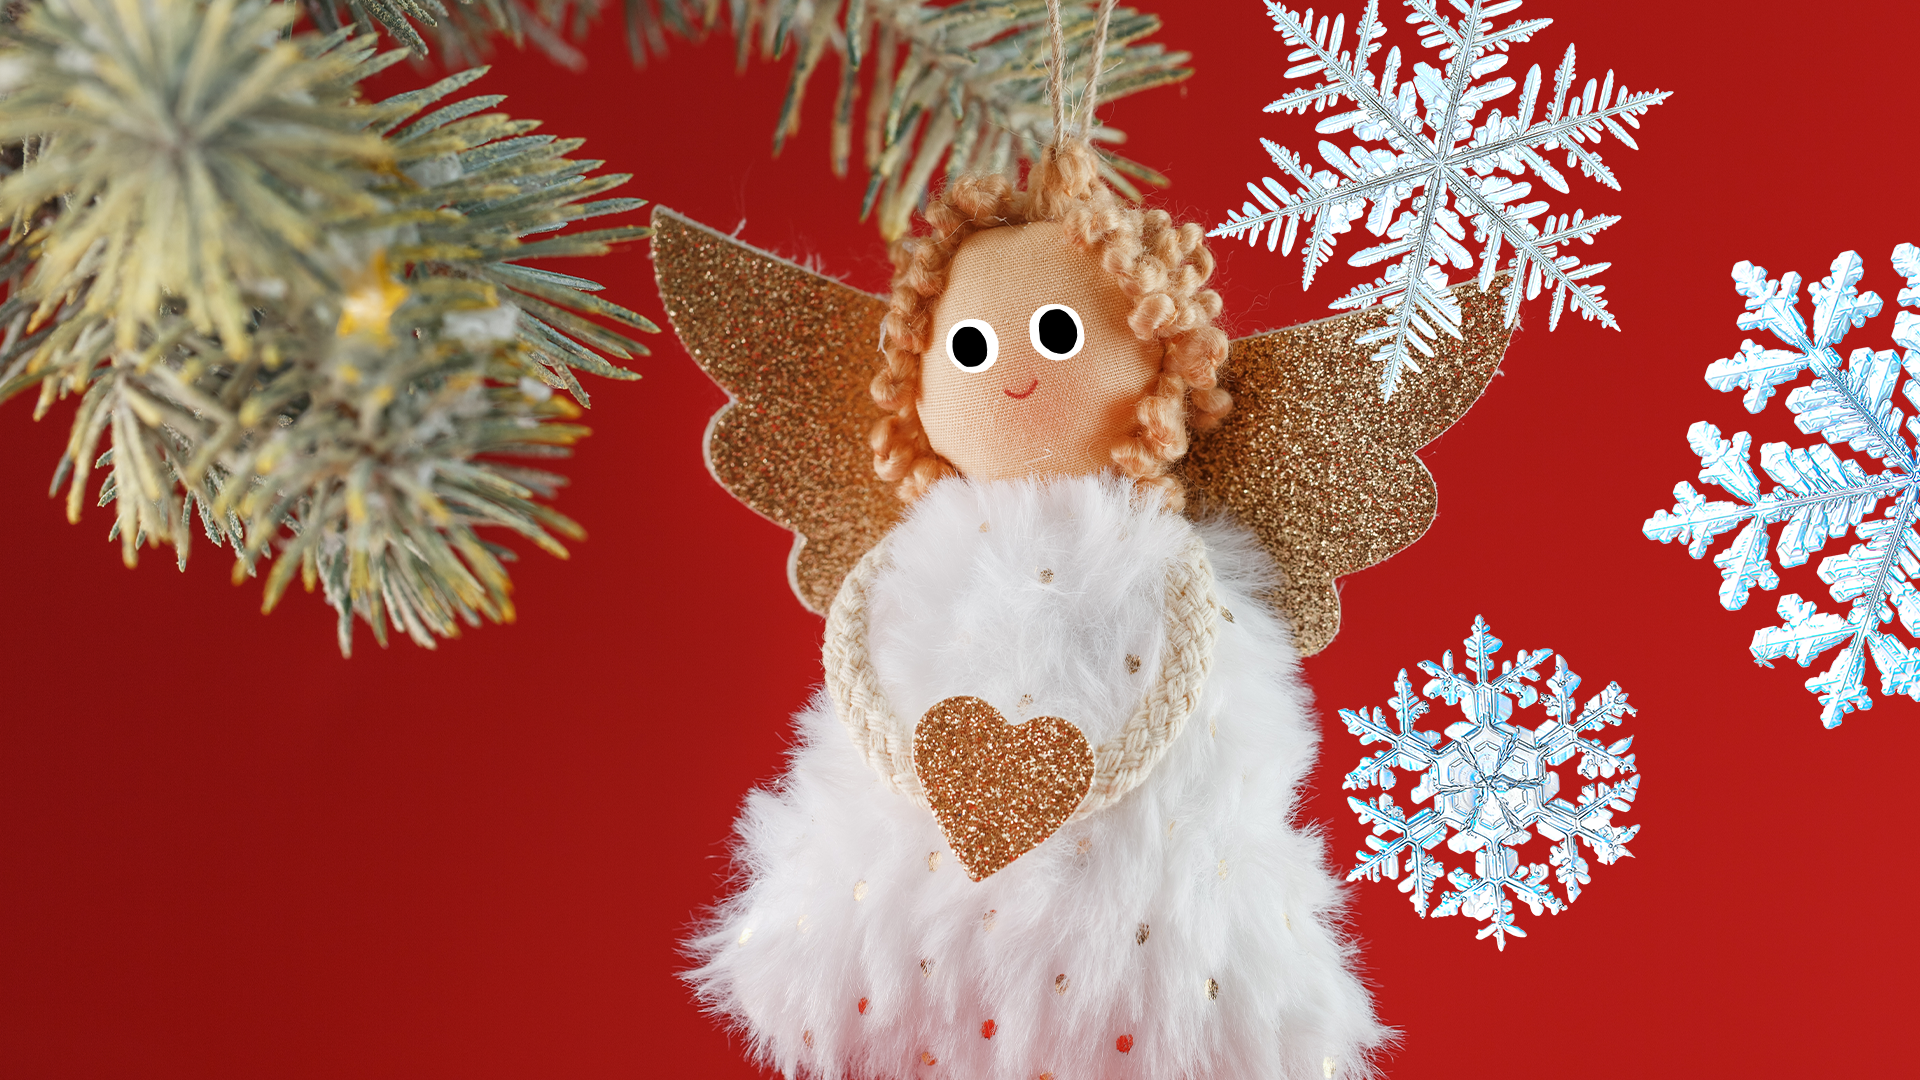 Angel decoration with snowflakes on red background